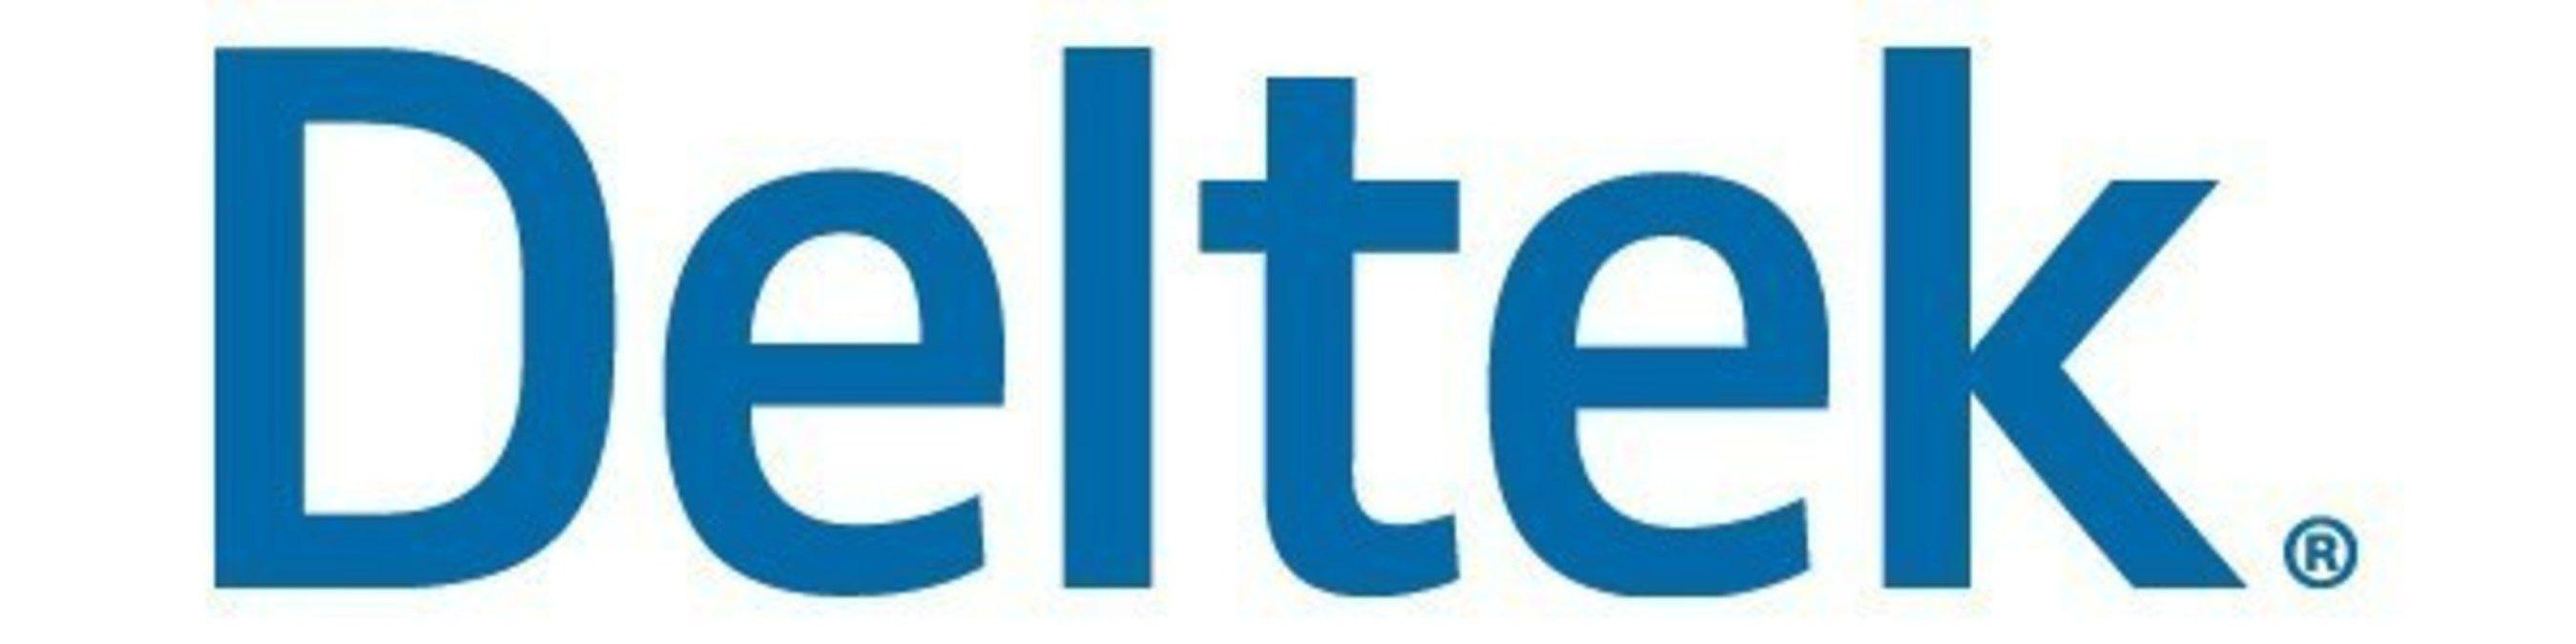 Roper Logo - Deltek to be Acquired by Roper Technologies